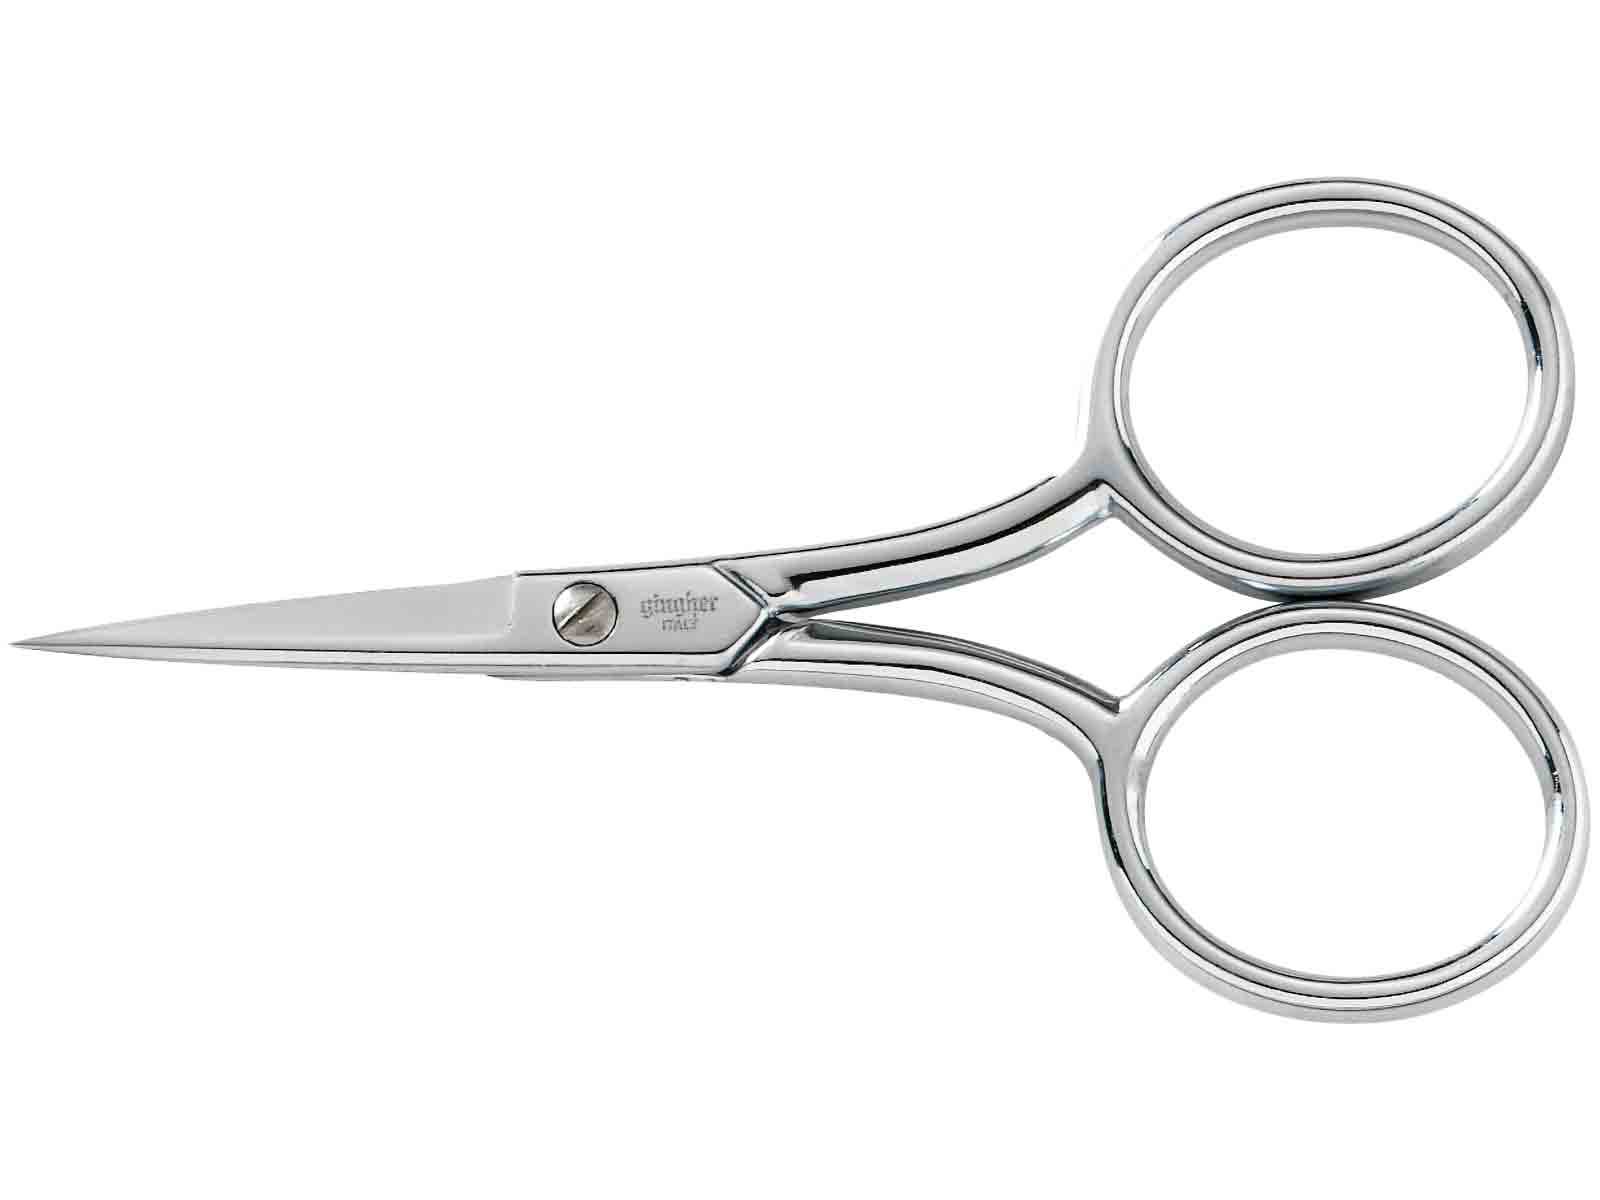 Gingher 220090 Forged 4 inch Large Handle Embroidery Scissors